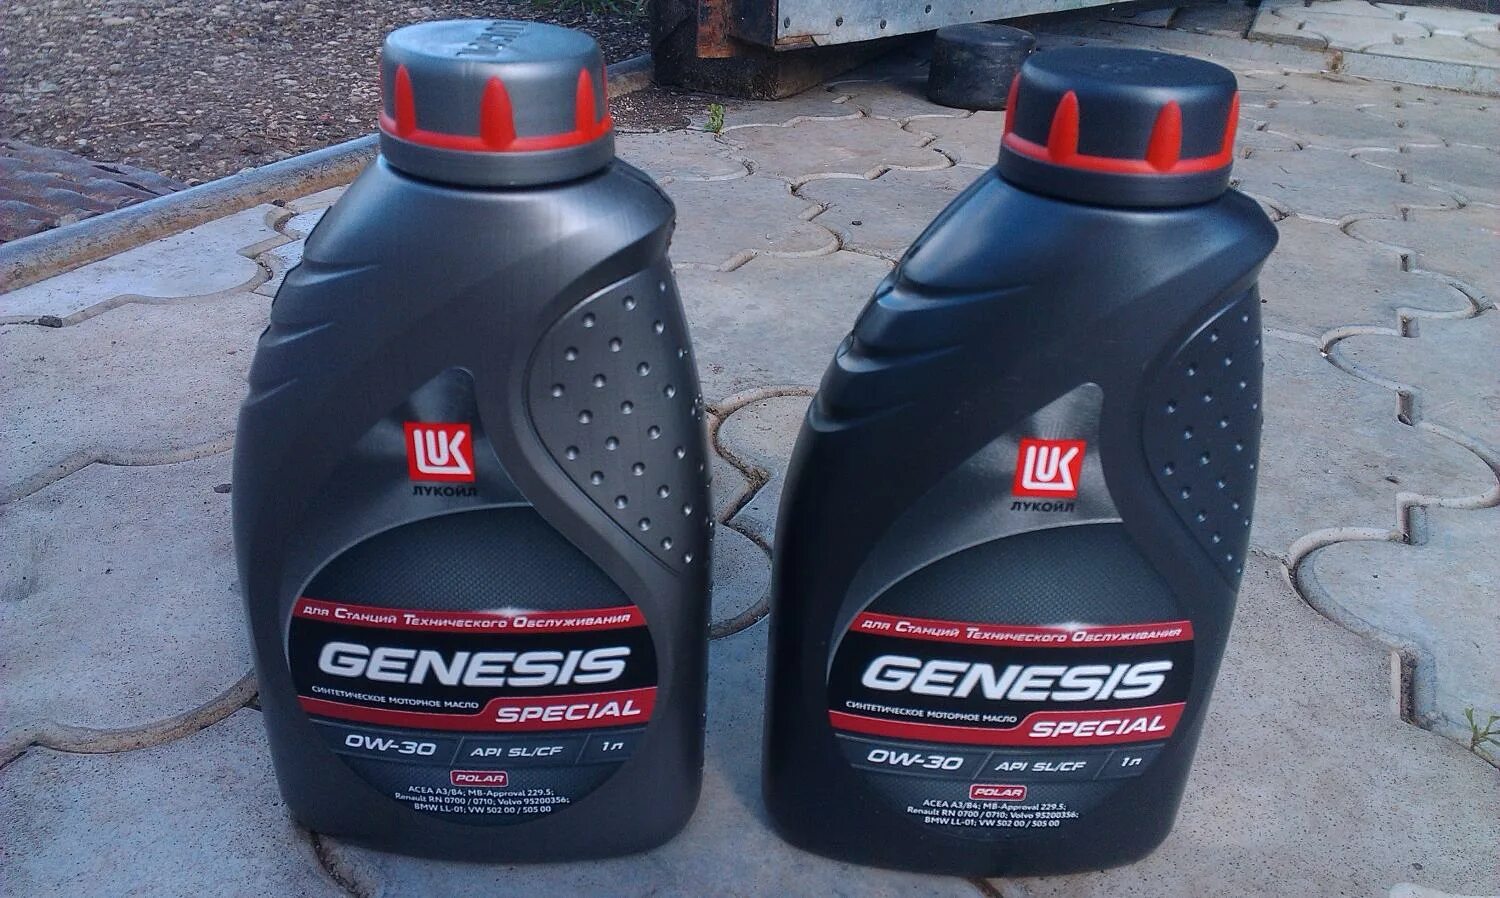 Лукойл Genesis Special 0w-30. Лукойл Genesis Special Polar 0w-30. Lukoil Genesis 0w30. Lukoil Genesis Special a5/b5 0w-30.